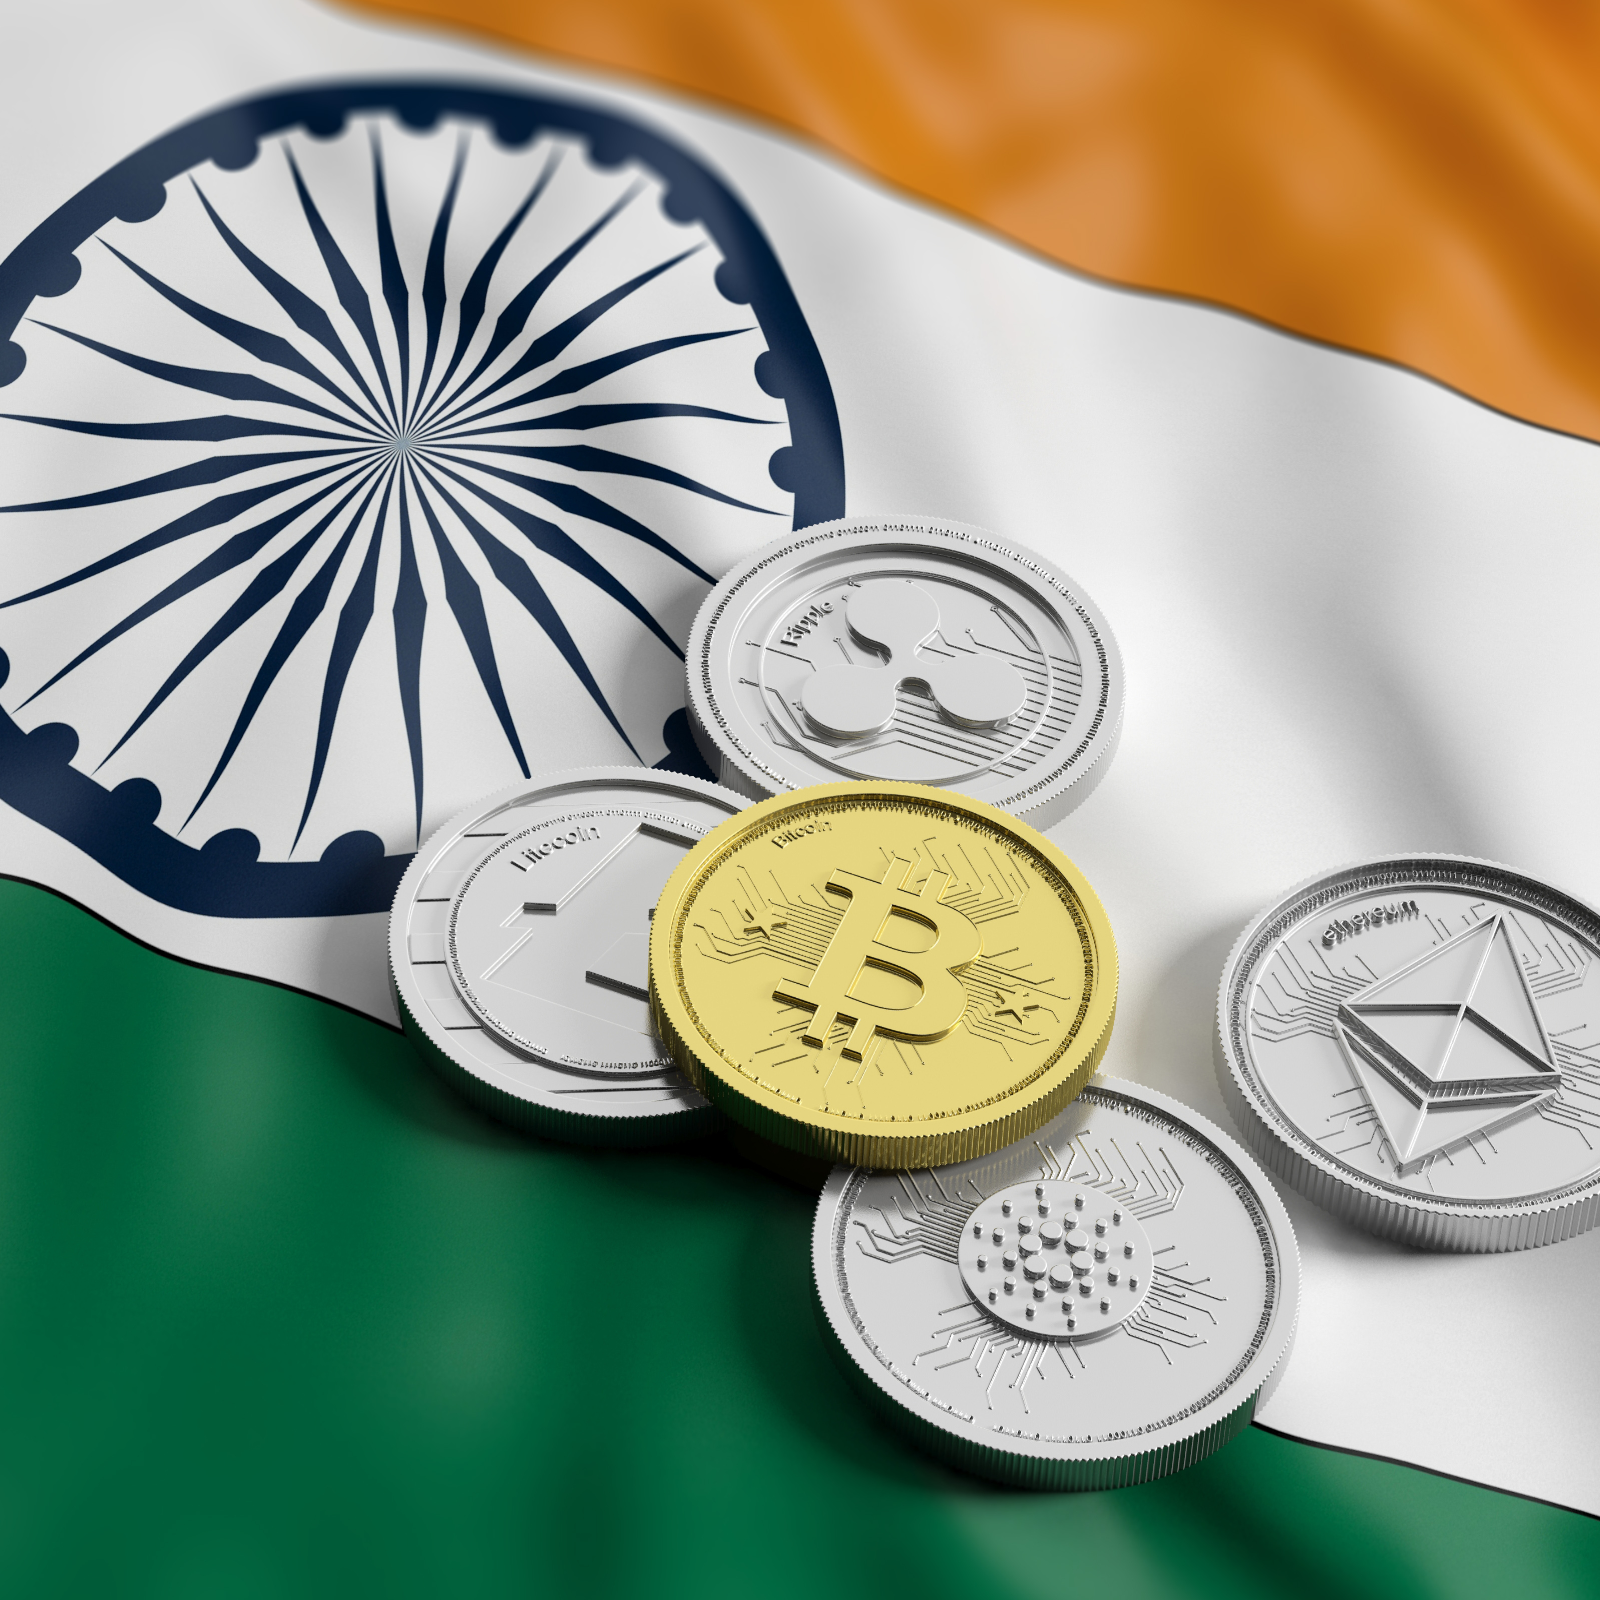 Huge Demand for 'P2P' Crypto Trading Seen in India After RBI Ban